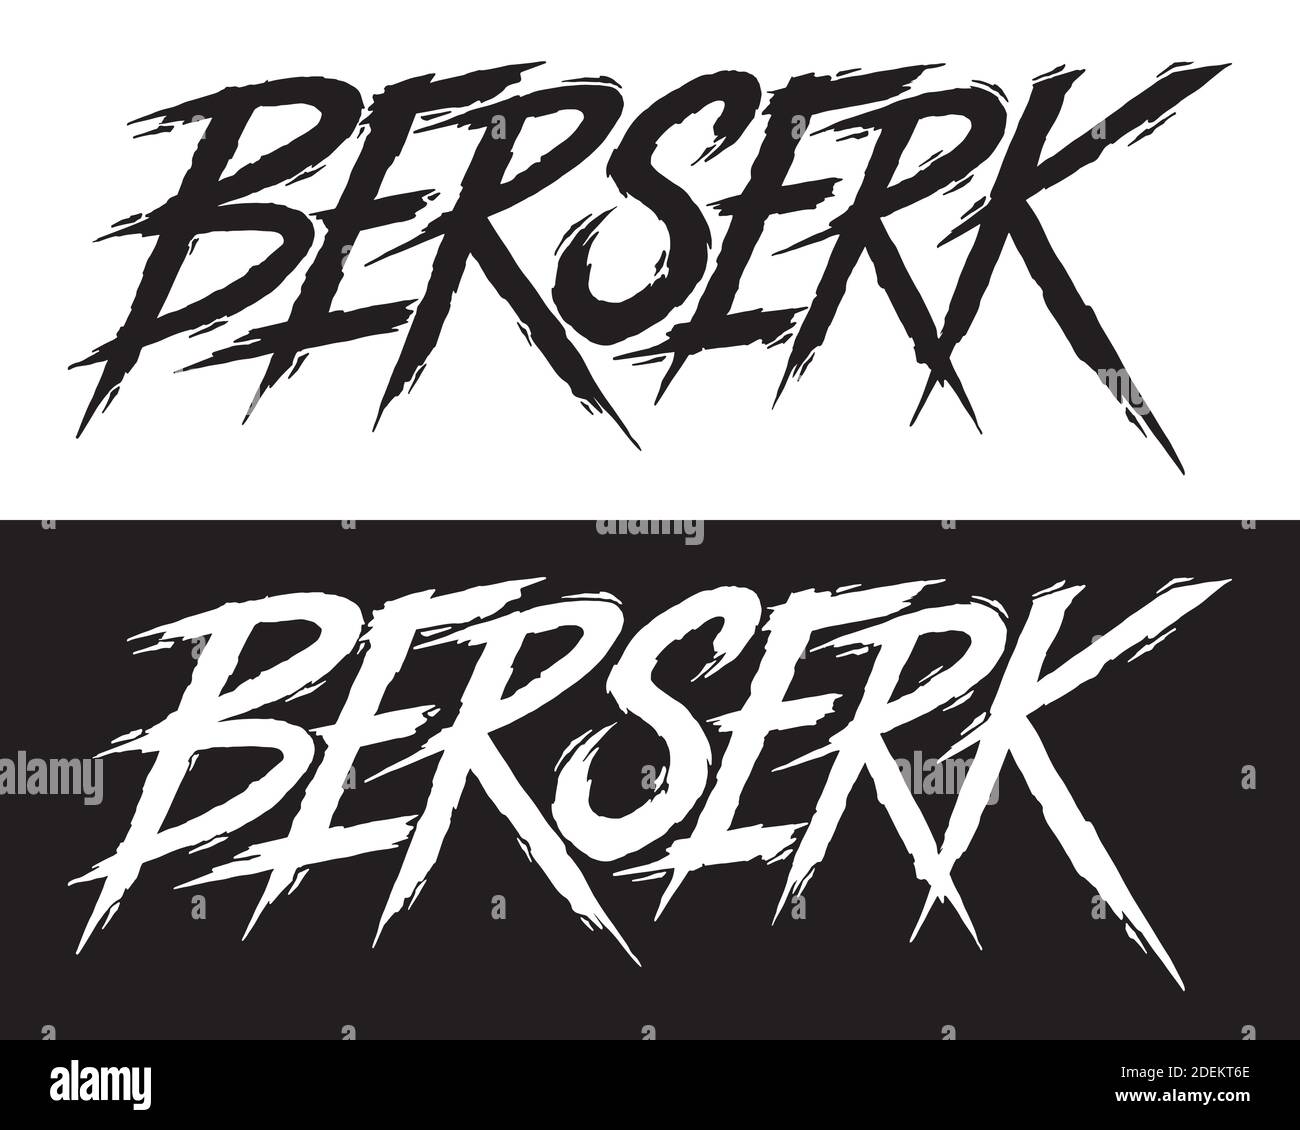 Berserk. Hand lettering word art. Black and white abstract style letters on isolated background. Black and white. Vector text illustration Stock Vector